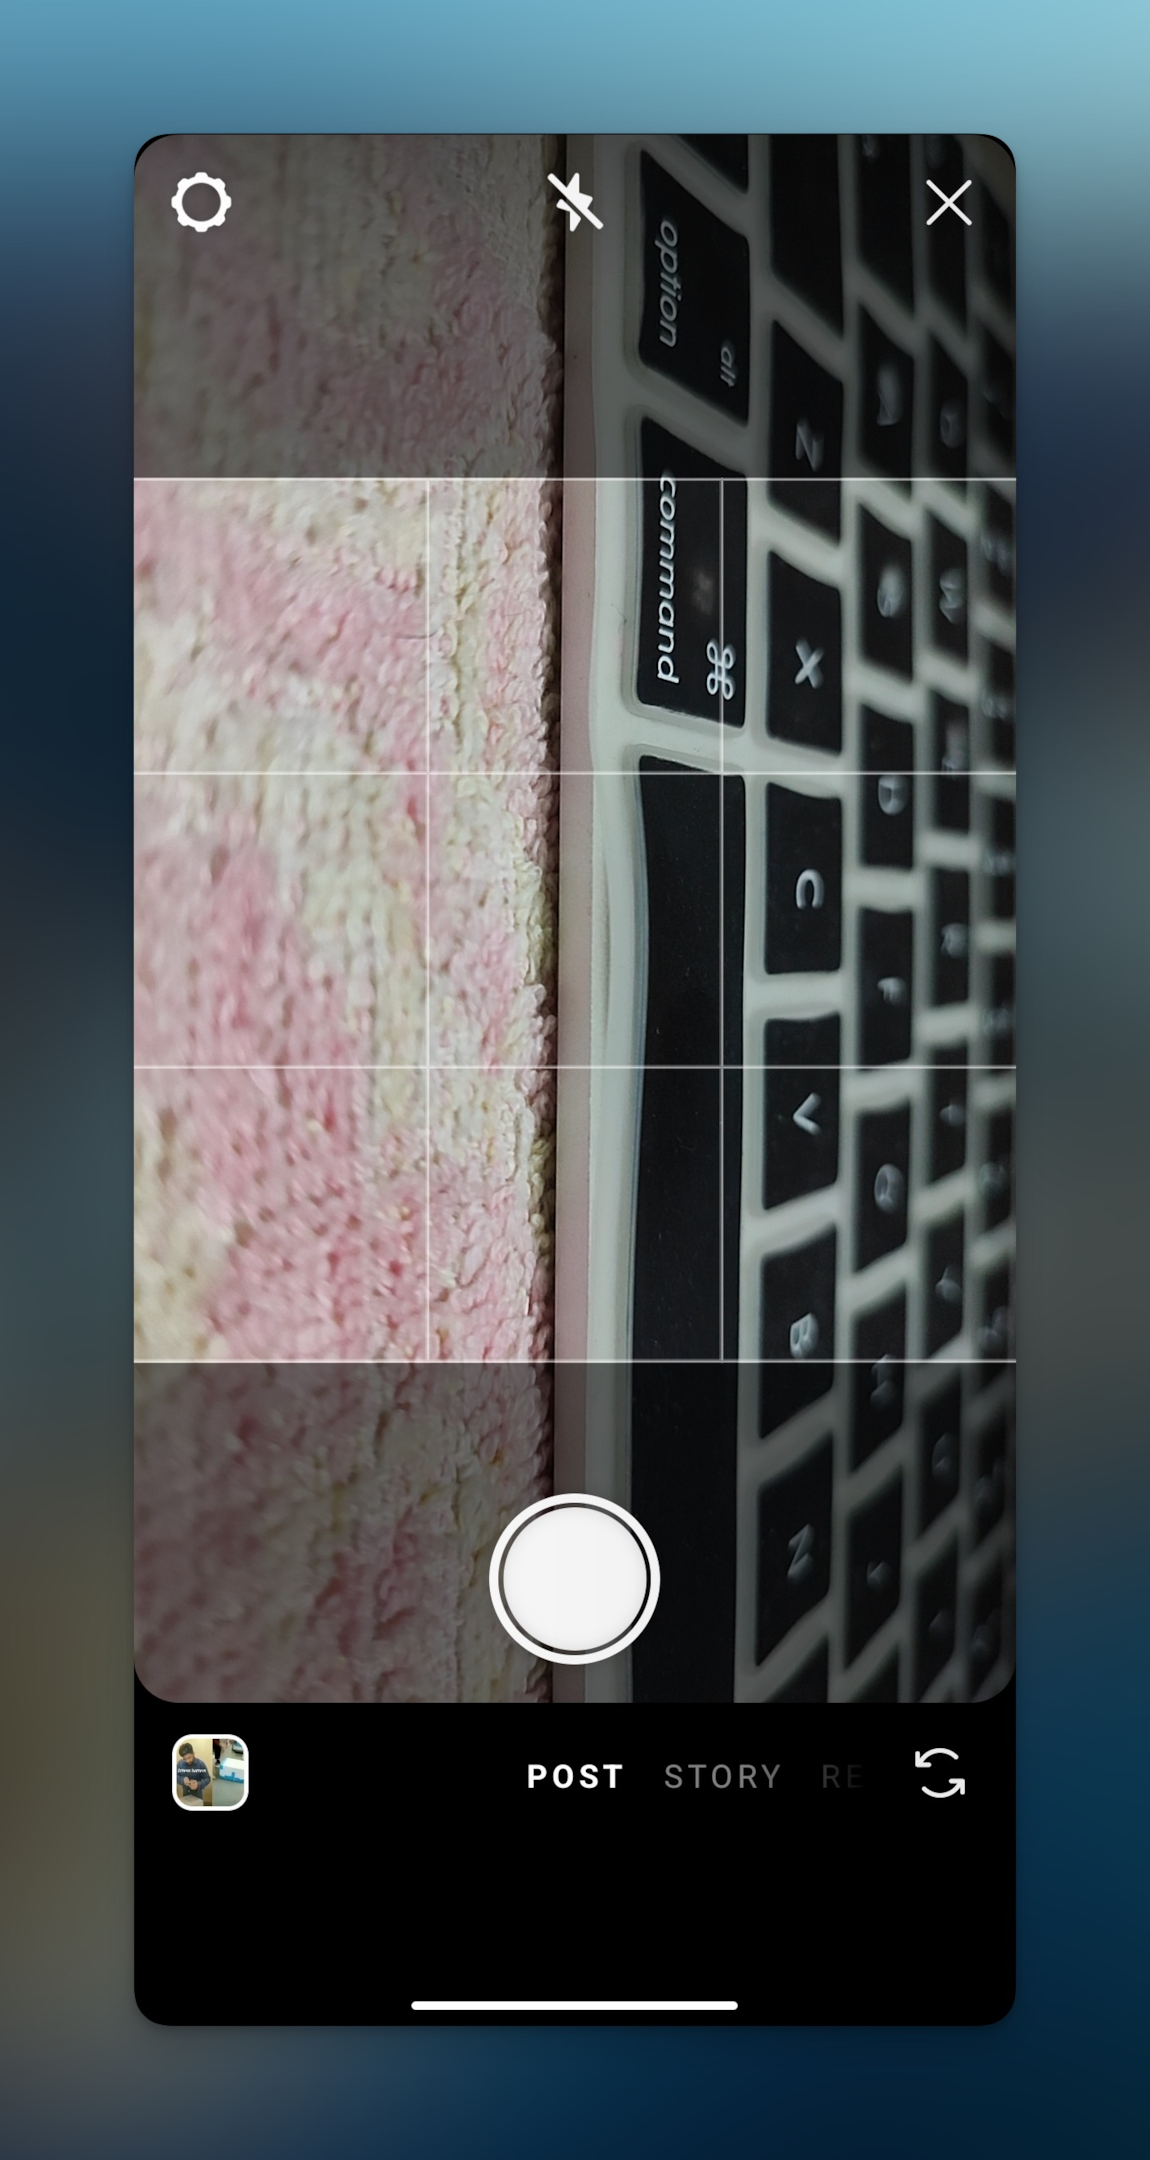 Remote.tools shows the square shape frame of the Instagram camera in the app 